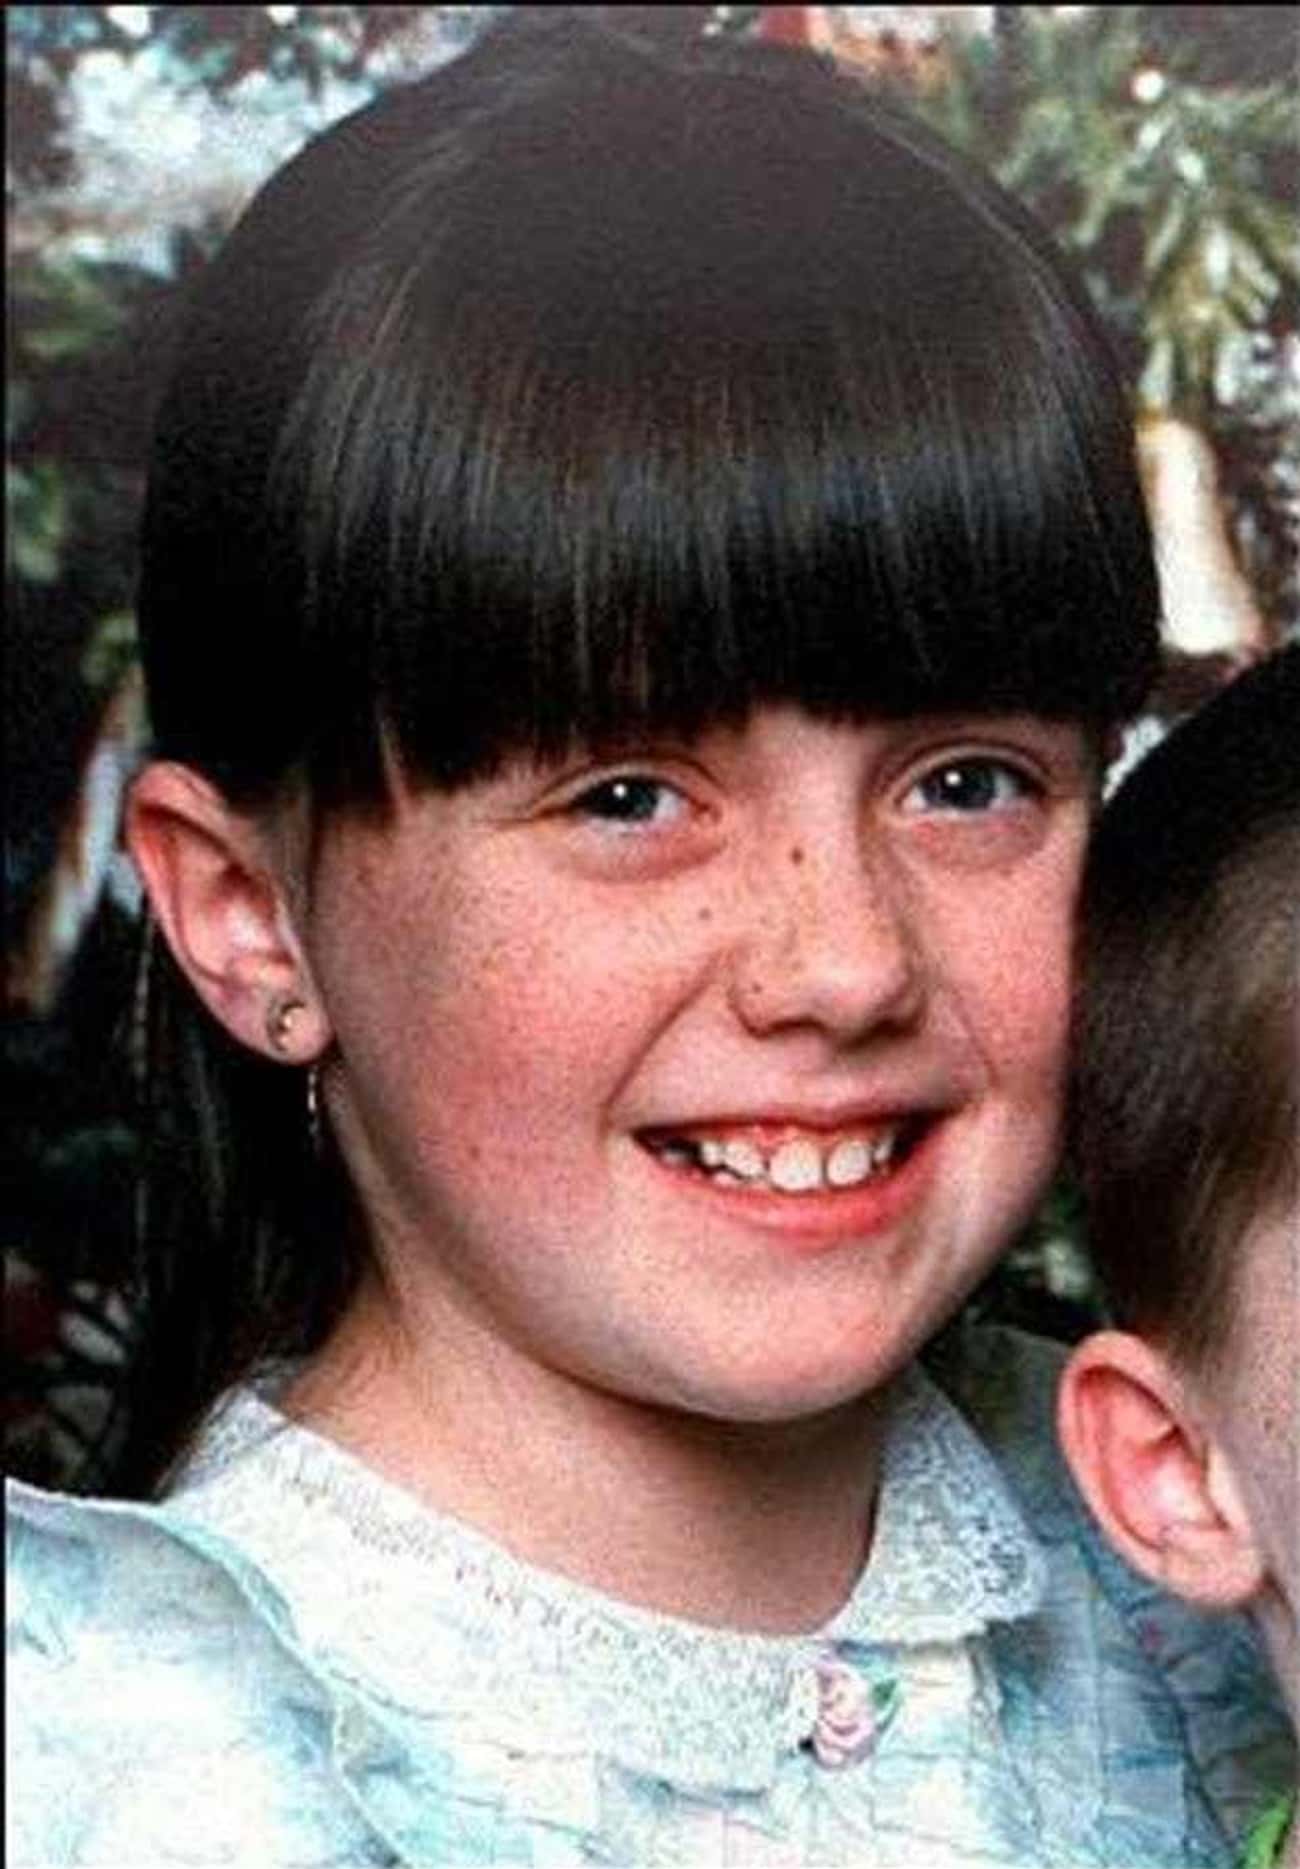 Amber Hangerman Was Abducted And Killed By An Unknown Attacker